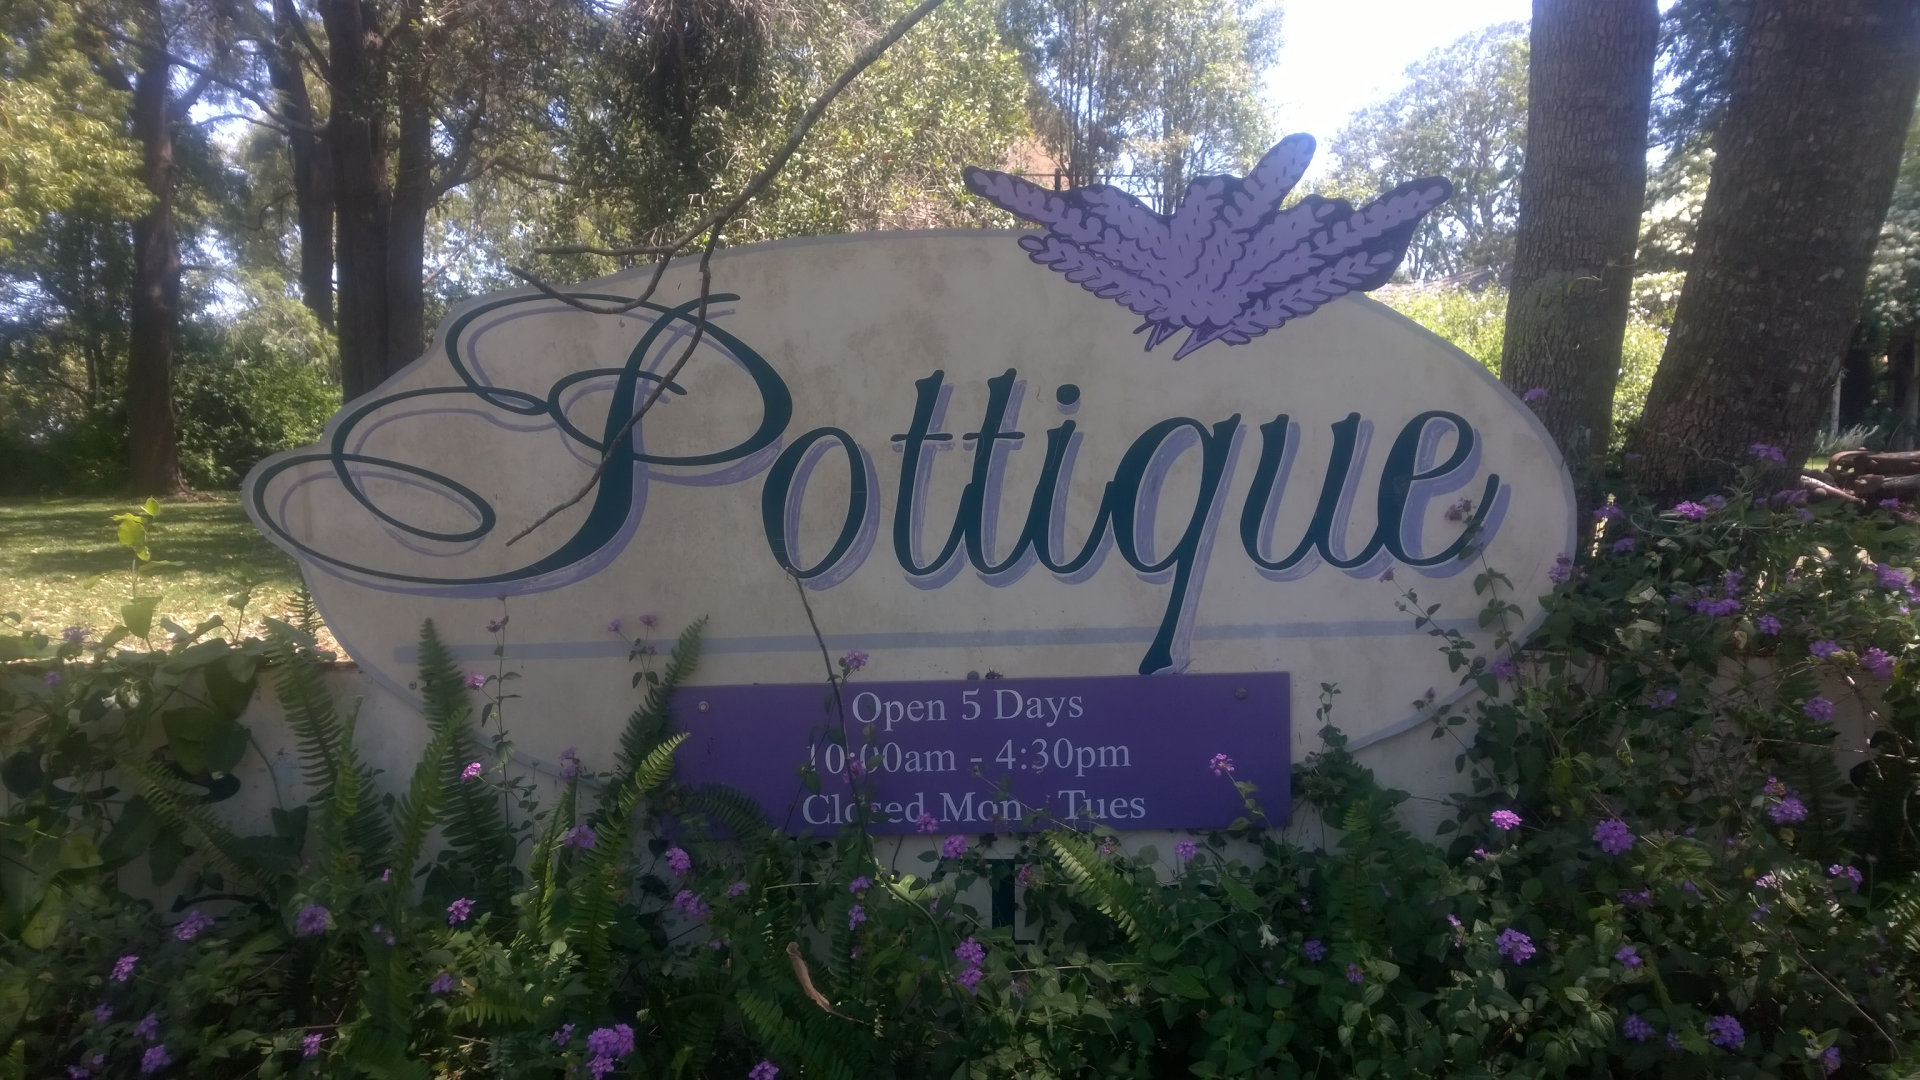 Sign of the Pottique Lavender Farm. Pottique is a cafe and shop with lavender based and other products at Coolabunia near Kingaroy